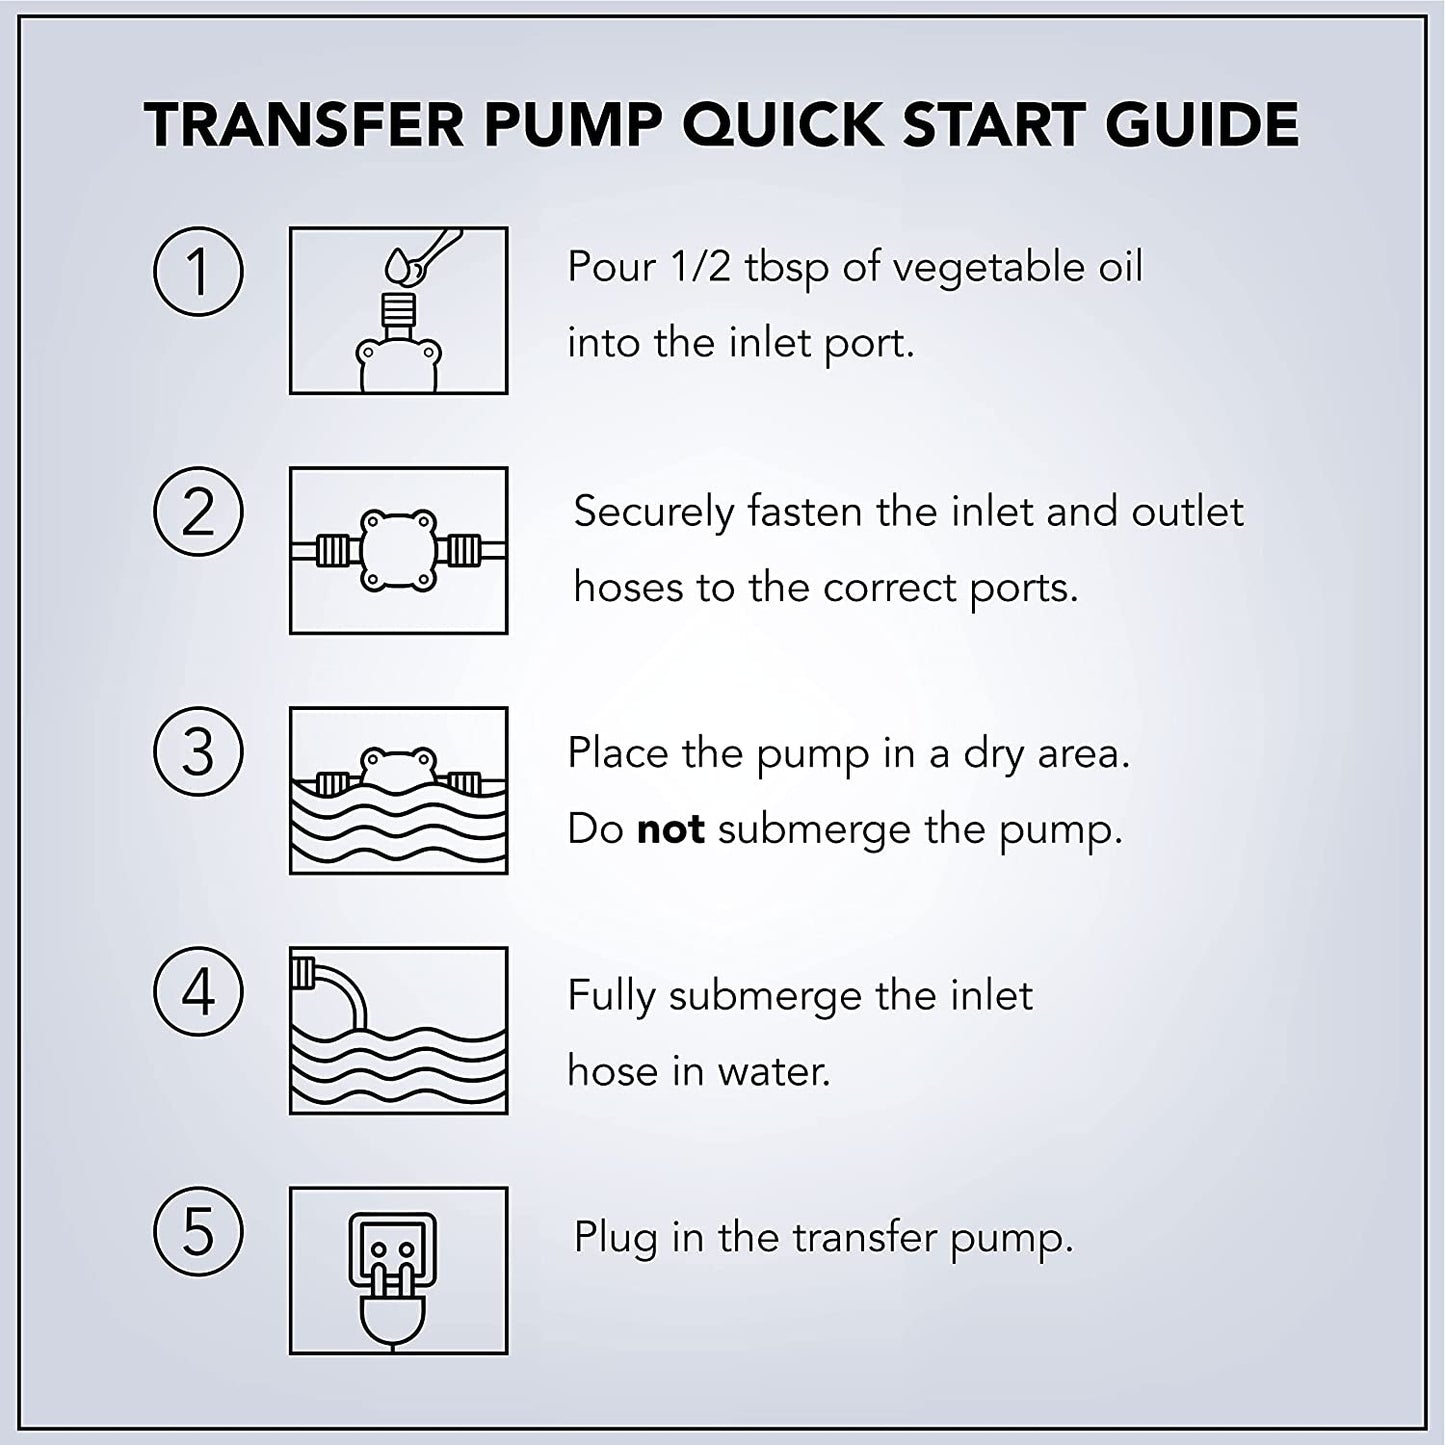 MFW Water Transfer Pump, 115V 330 Gallon Per Hour - Portable Electric Utility Pump with 6' Water Hose Kit - To Remove Water From Garden, Hot Tub, Rain Barrel, Pool, Ponds, Aquariums, and More